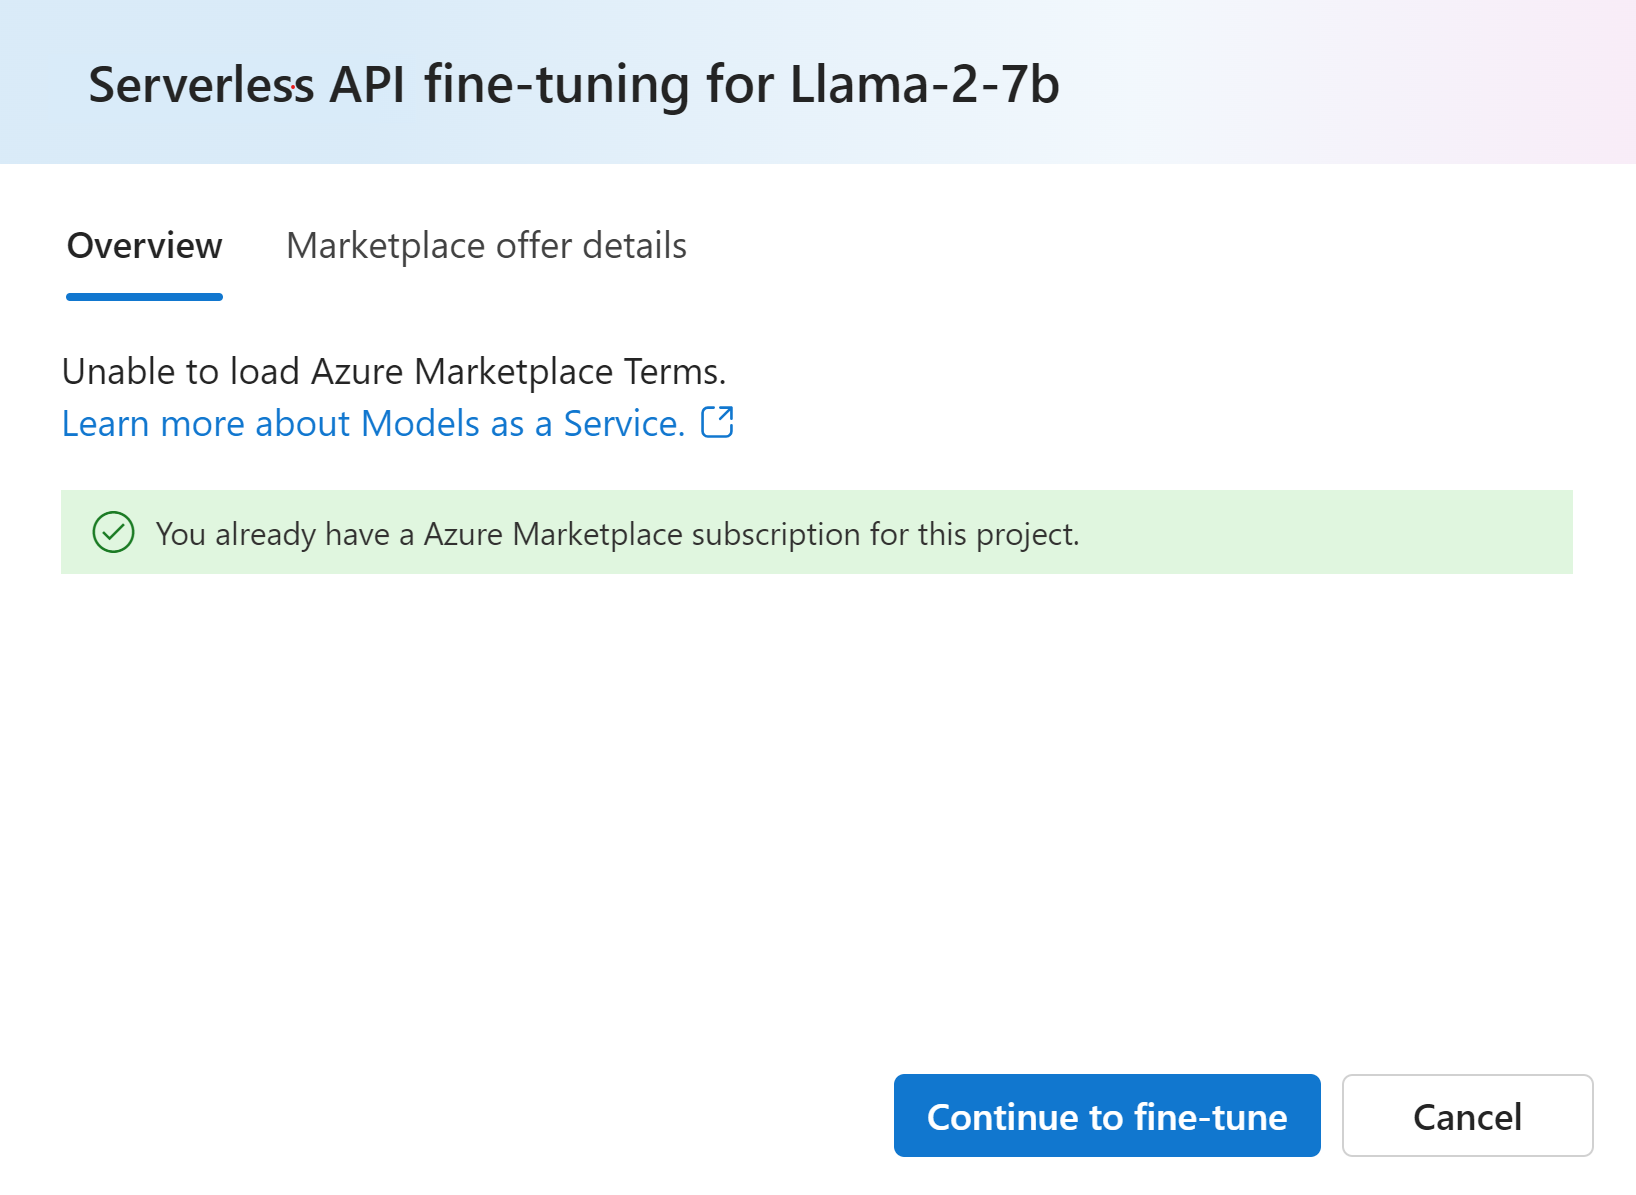 https://learn.microsoft.com/en-us/azure/ai-studio/media/how-to/fine-tune/llama/llama-pay-as-you-go-overview.png